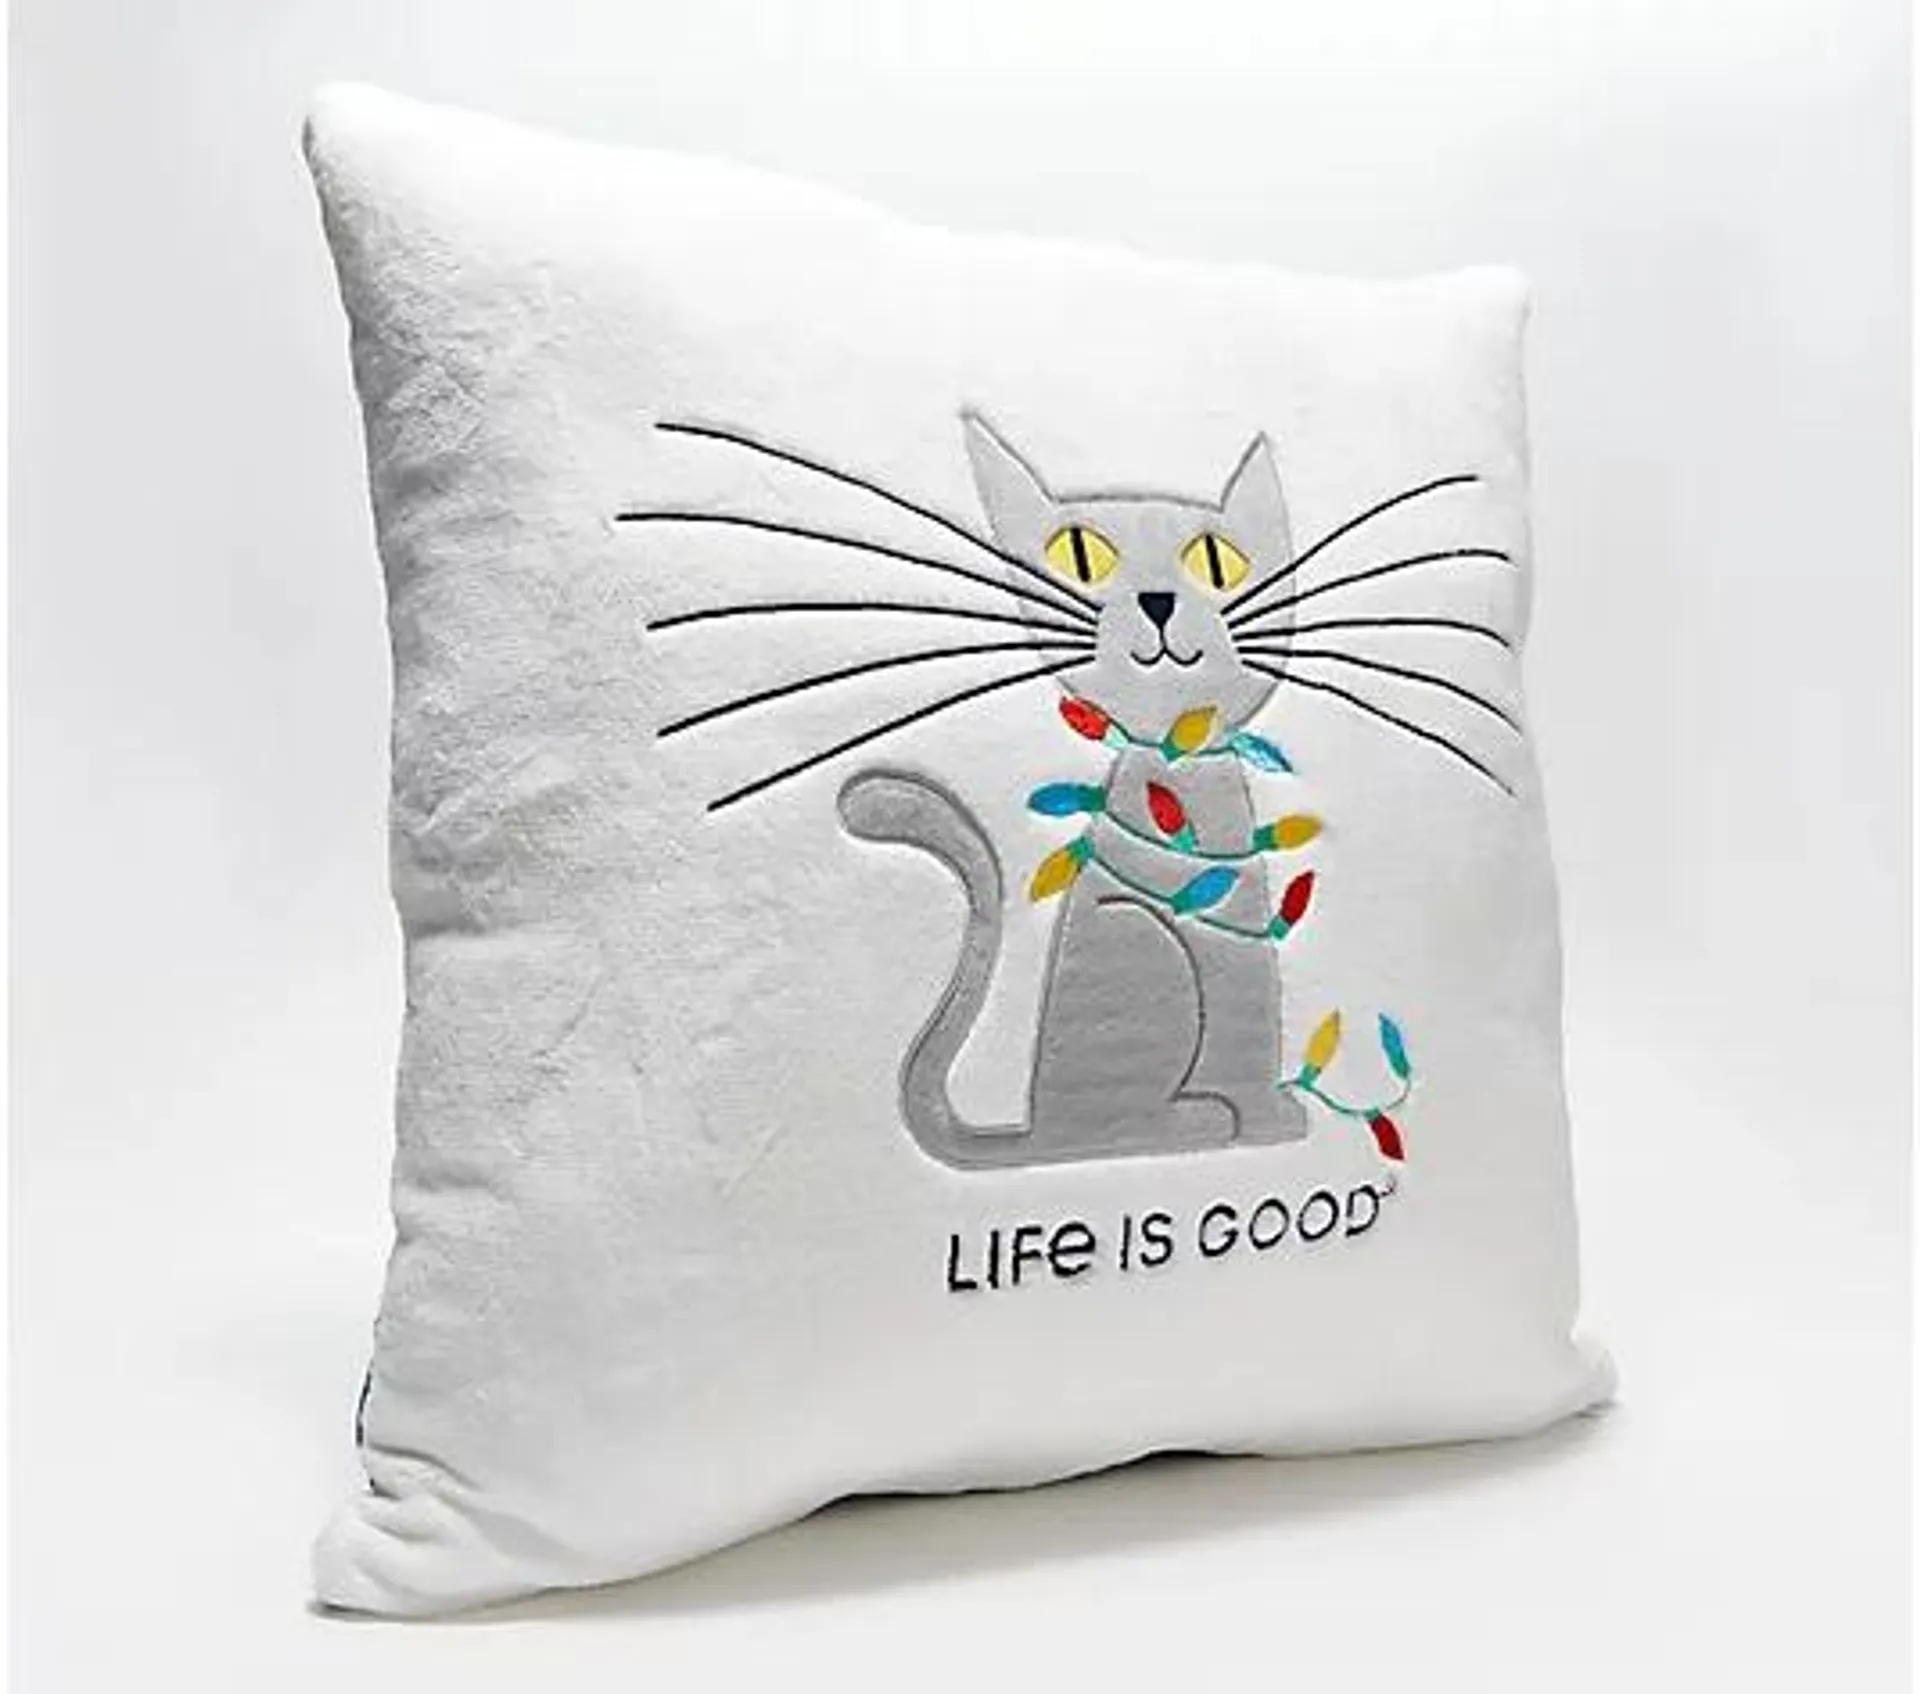 Life is Good 20" x 20" Primalite Novelty Pillow w/Plaid Reverse